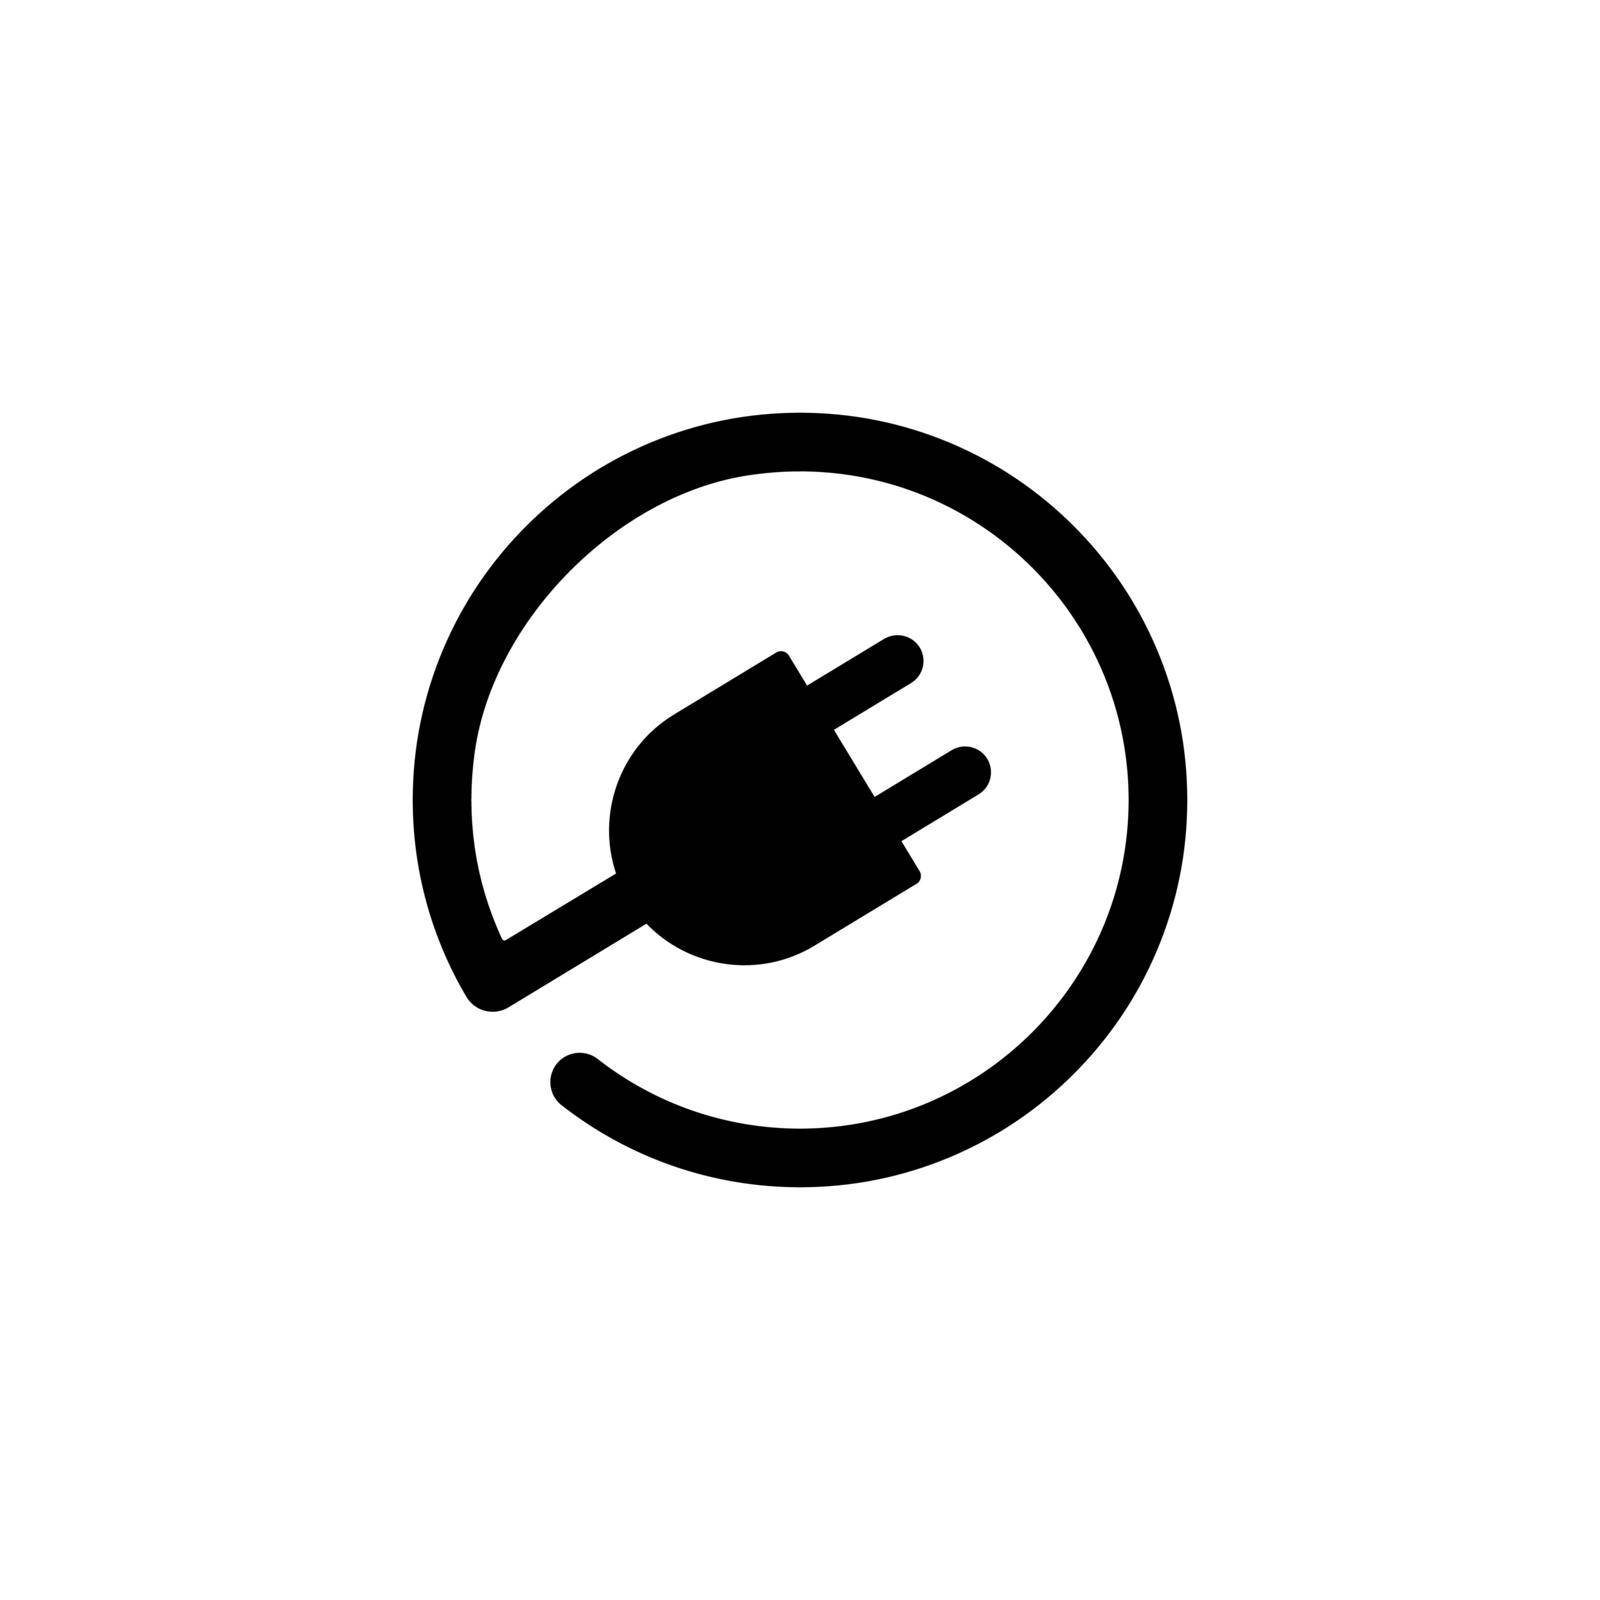 Plug-in electrical plug vector icon. Electric plug with wire Vector EPS10